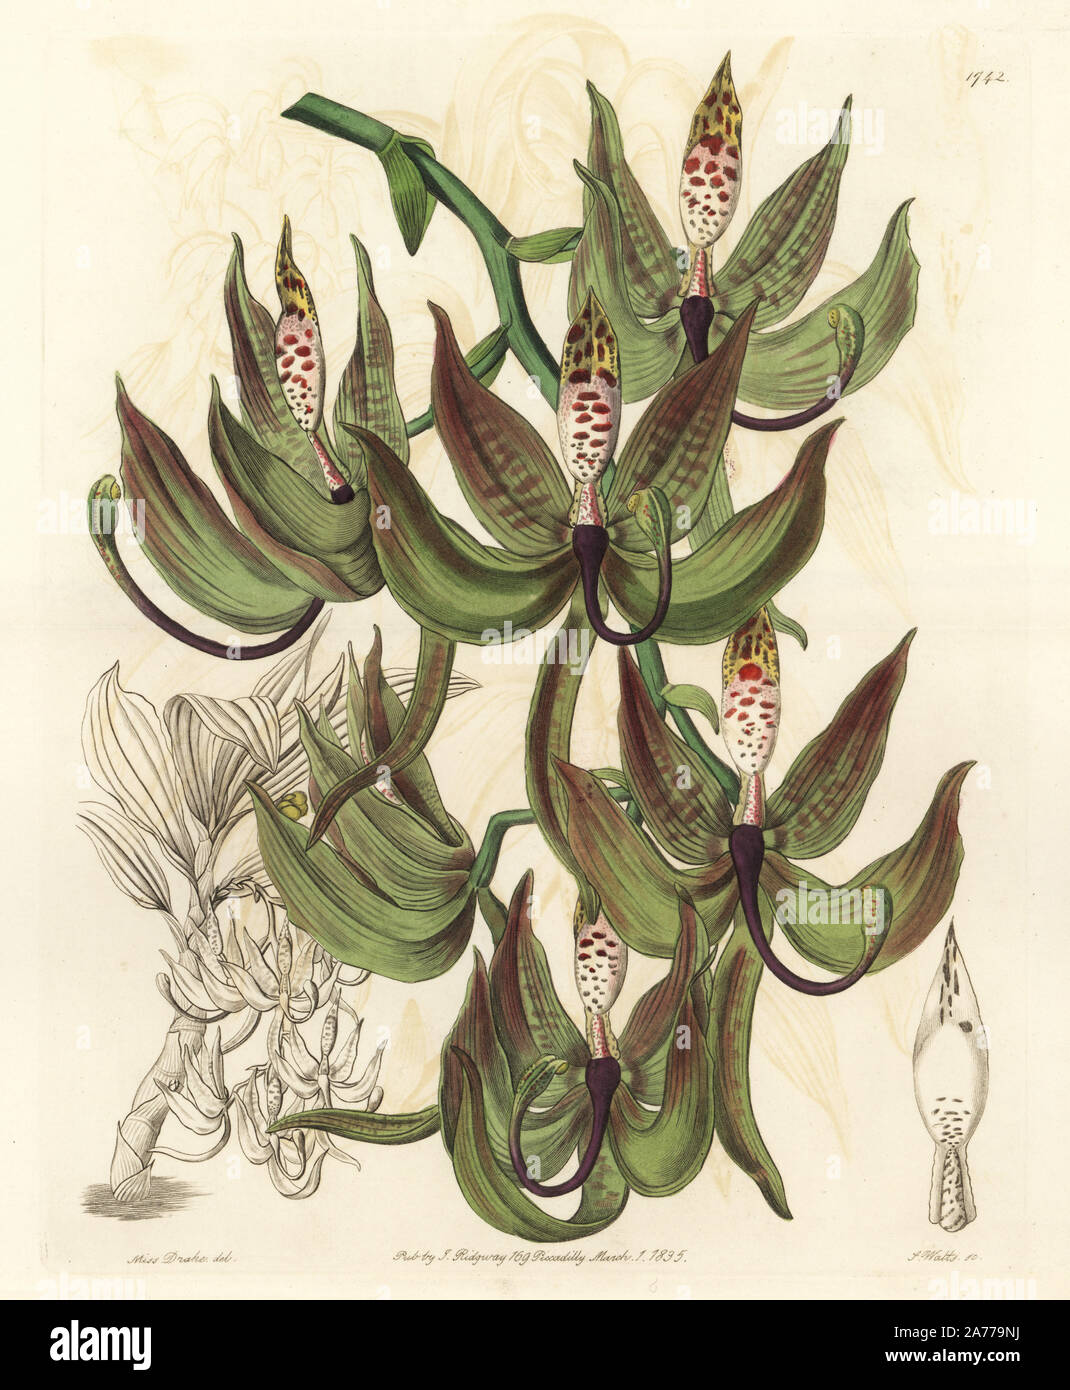 Loddiges' swanwort orchid, Cycnoches loddigesii. Handcoloured copperplate engraving by S. Watts after an illustration by Miss Drake from Sydenham Edwards' 'The Botanical Register,' London, Ridgway, 1835. Sarah Anne Drake (1803-1857) drew over 1,300 plates for the botanist John Lindley, including many orchids. Stock Photo